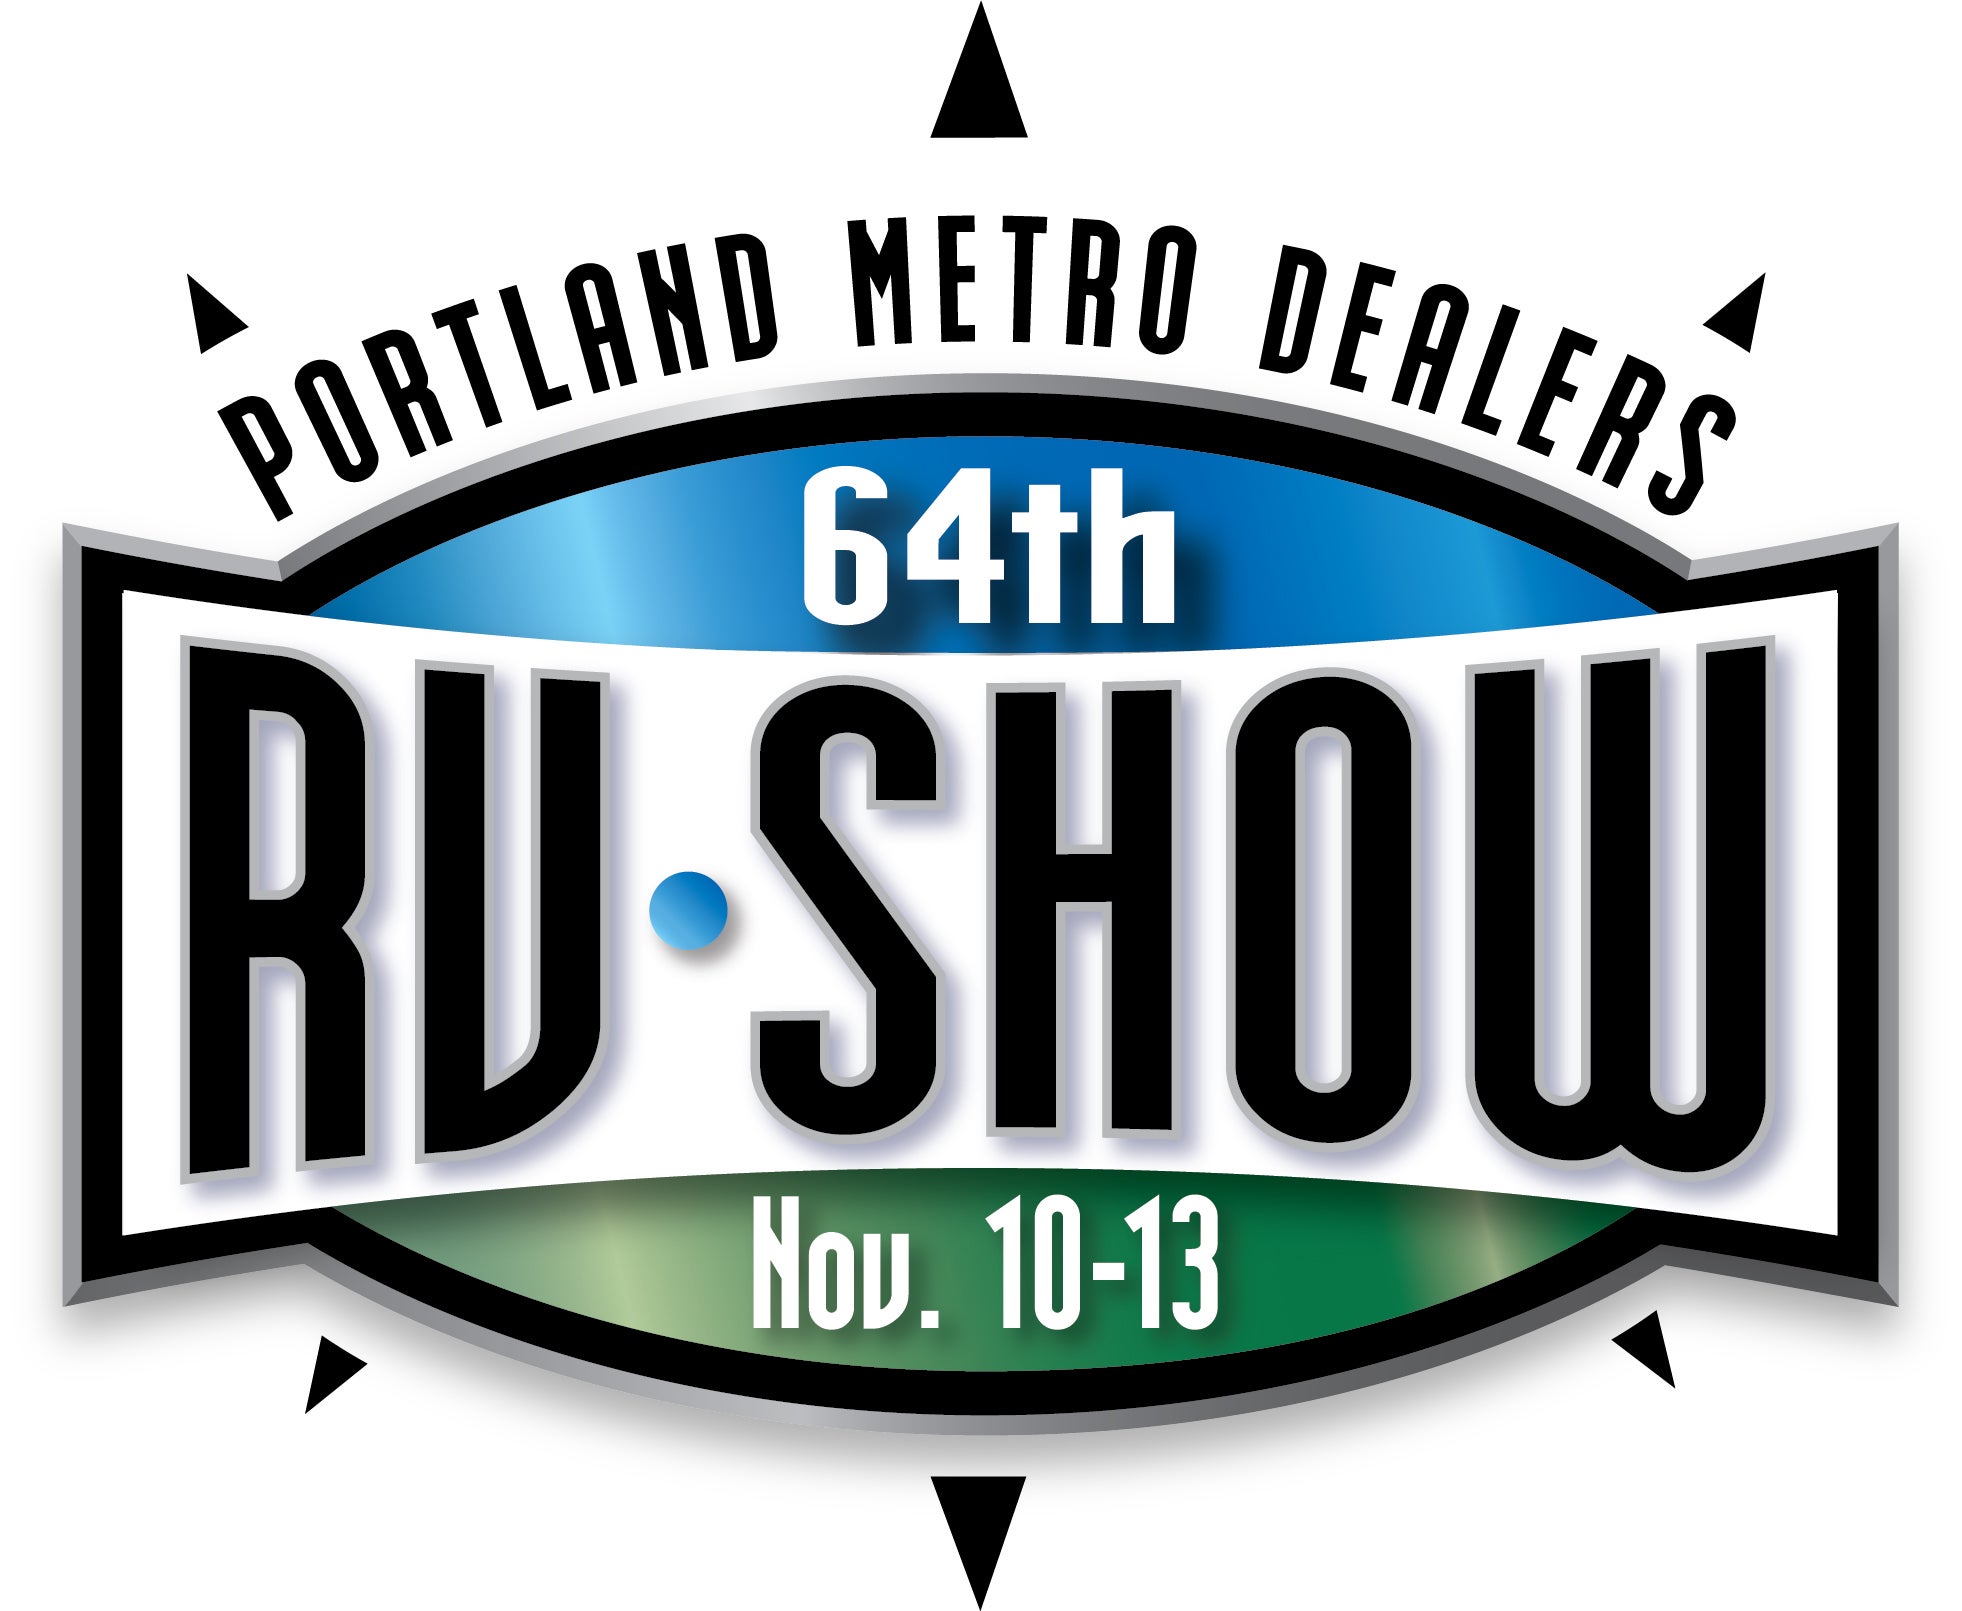 Parking for Portland Metro RV Dealers: 64th Annual Fall RV Show